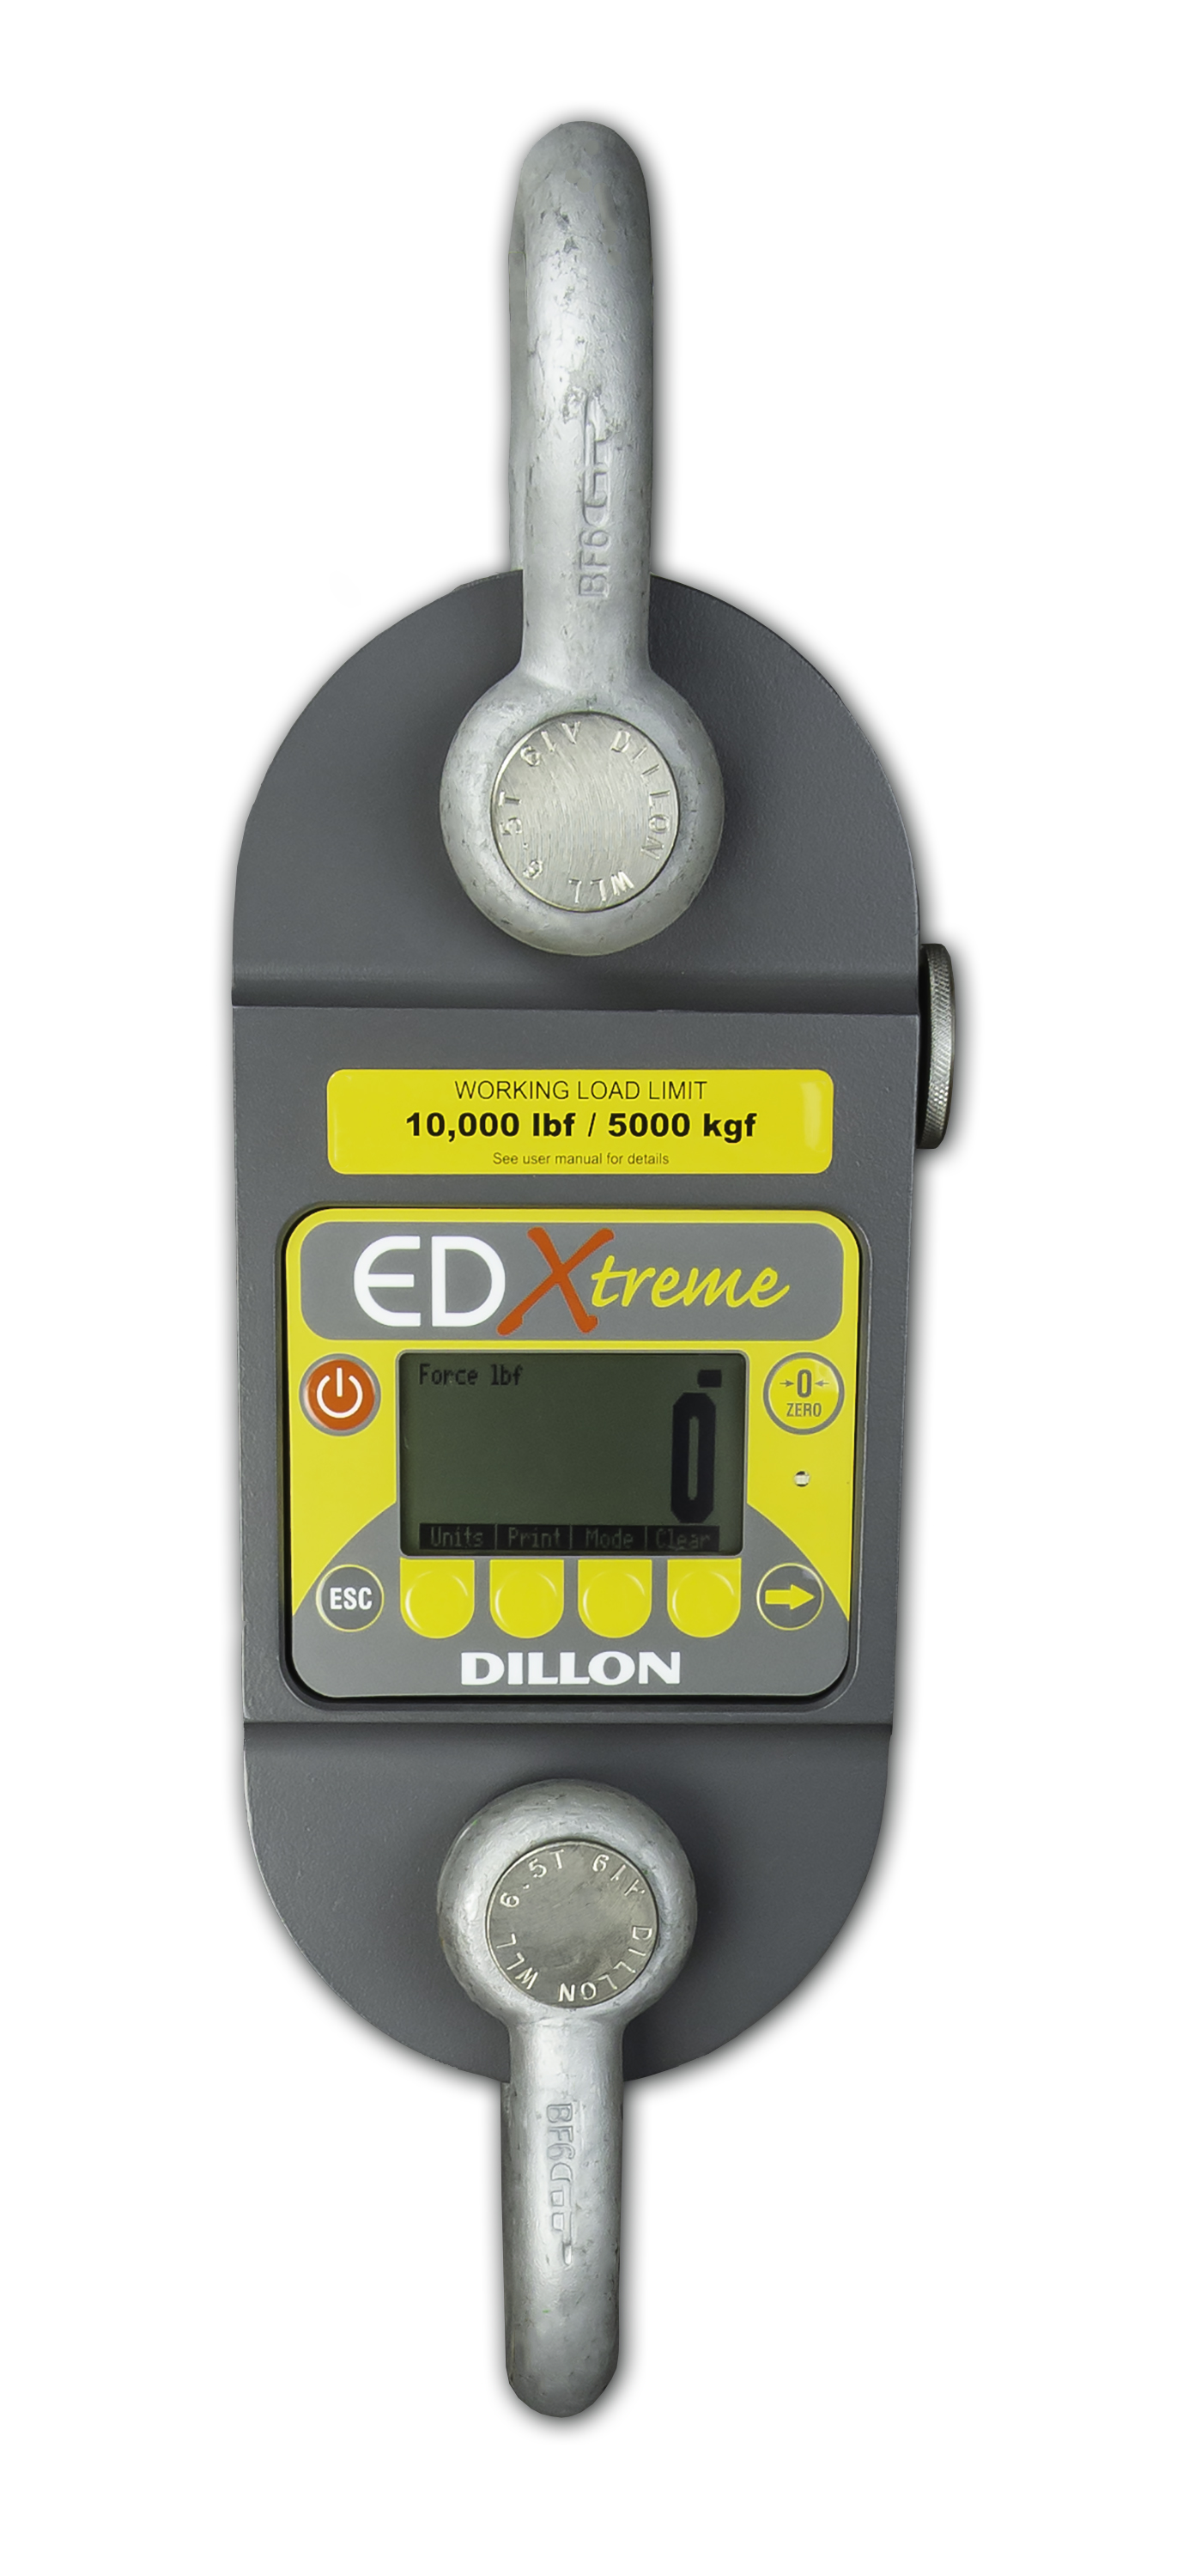 EDXtreme Dynamometer EDX10t - front